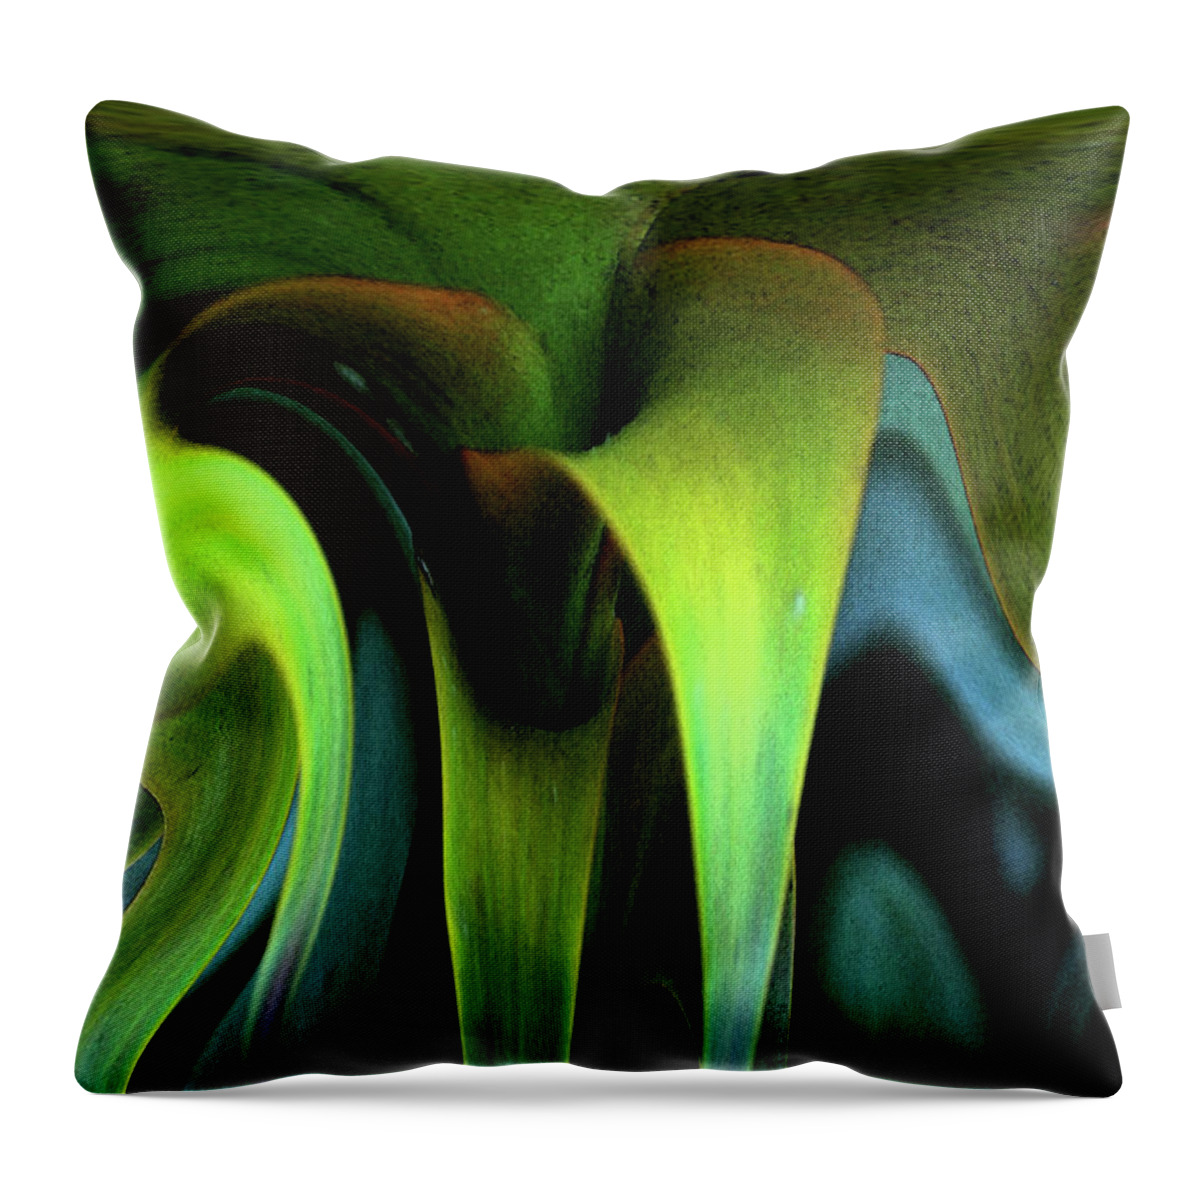 Green Throw Pillow featuring the photograph Cornflower Abstract No1 by Wayne King